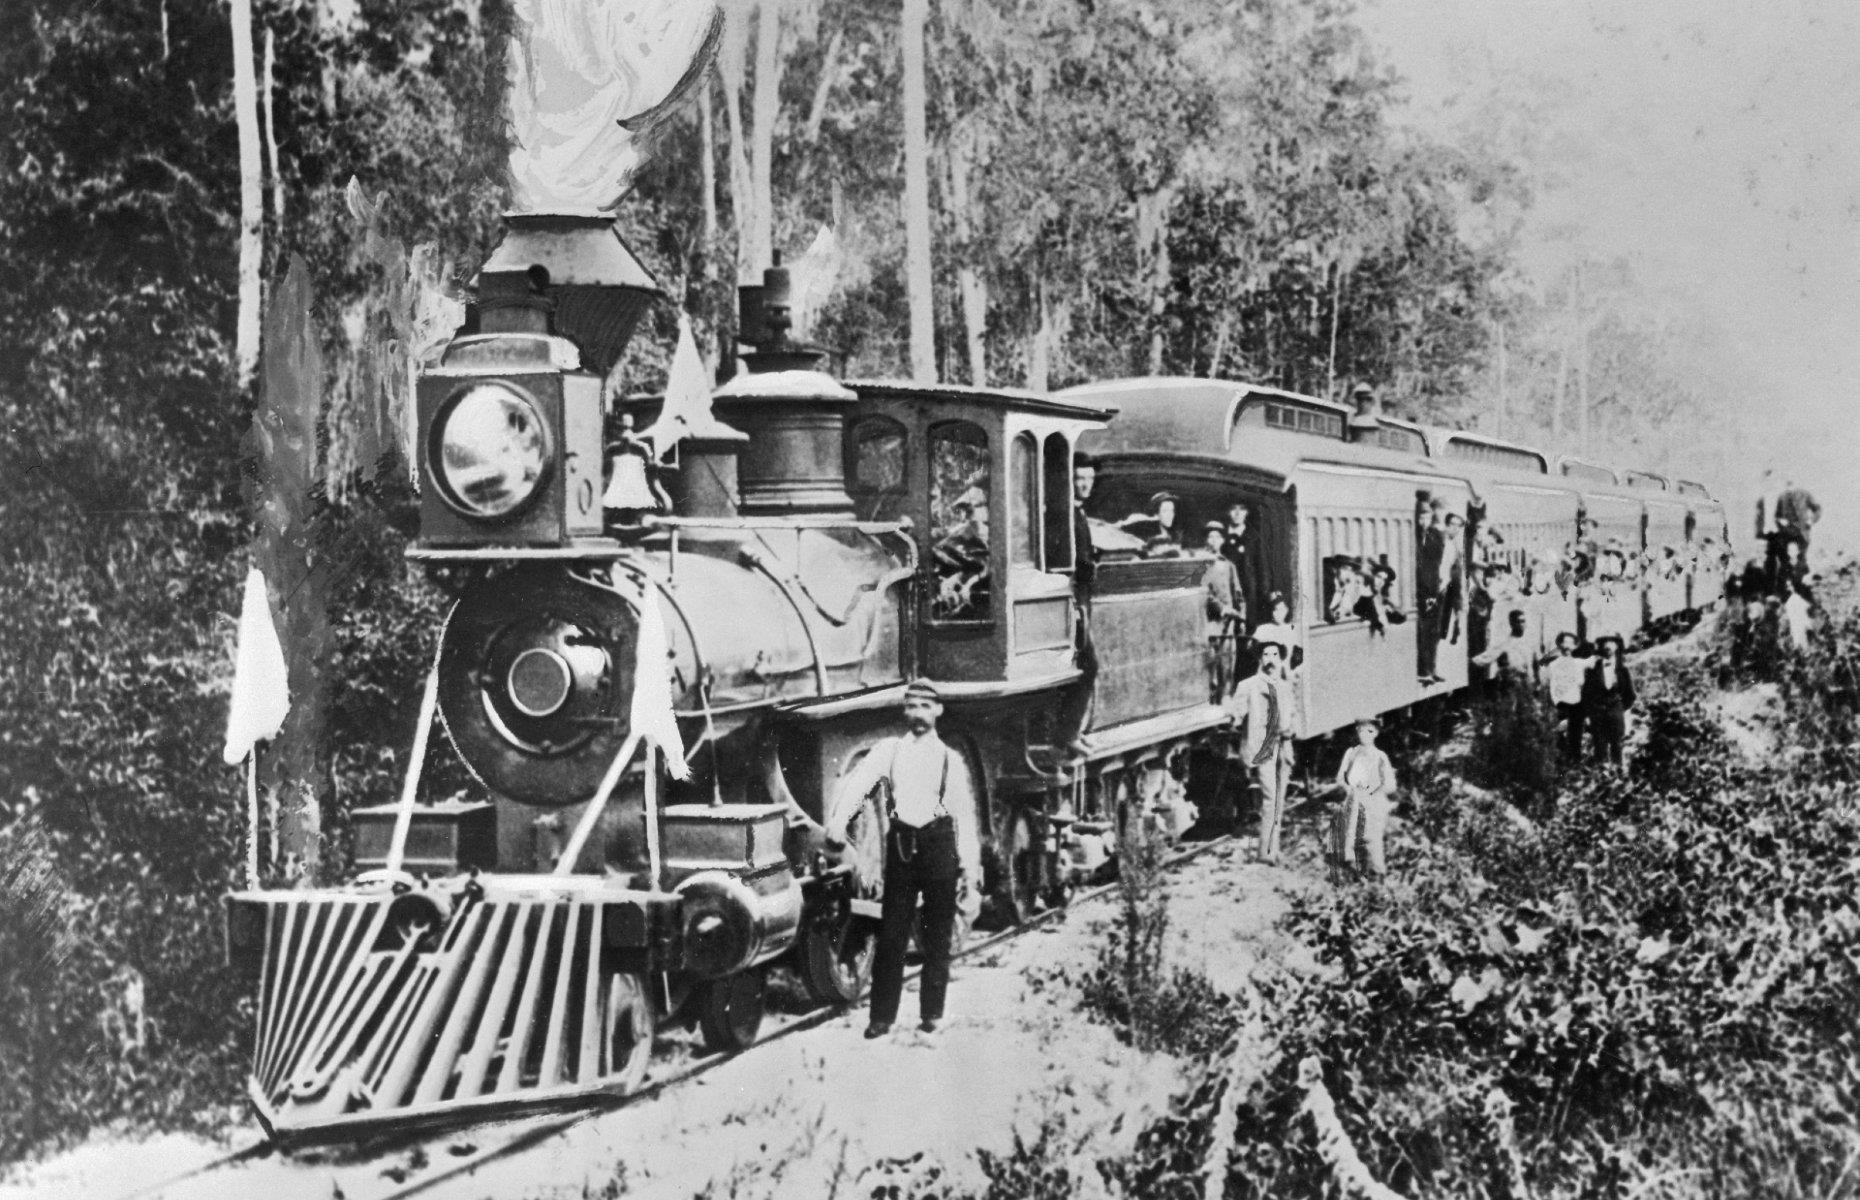 <p>As the United States expanded into the Wild West, settlers were transported by a technological advance that changed the face of America: the railroad. Railways would eventually cross both country and continent, linking the Atlantic and Pacific oceans and helping turn America into the global superpower that it is today.</p>  <p><strong>Click through this gallery to journey back in time to the nation’s first locomotive, steam through the Golden Age of Rail and terminate once again in the present day...</strong></p>